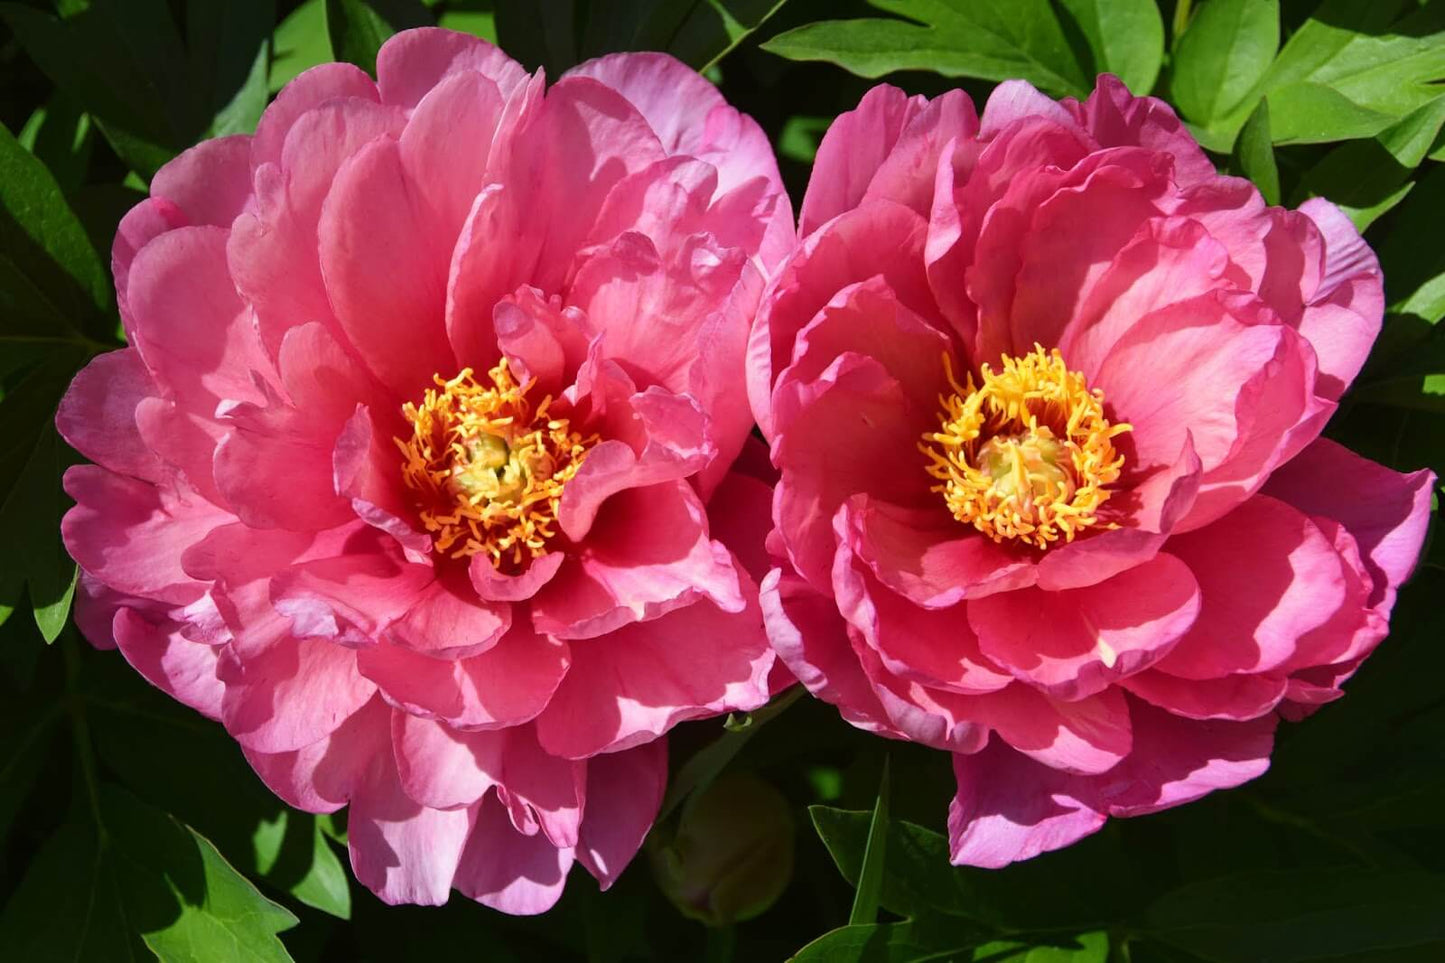 'PINK DOUBLE DANDY' Itoh peony (Paeonia x intersectional 'pink double dandy')